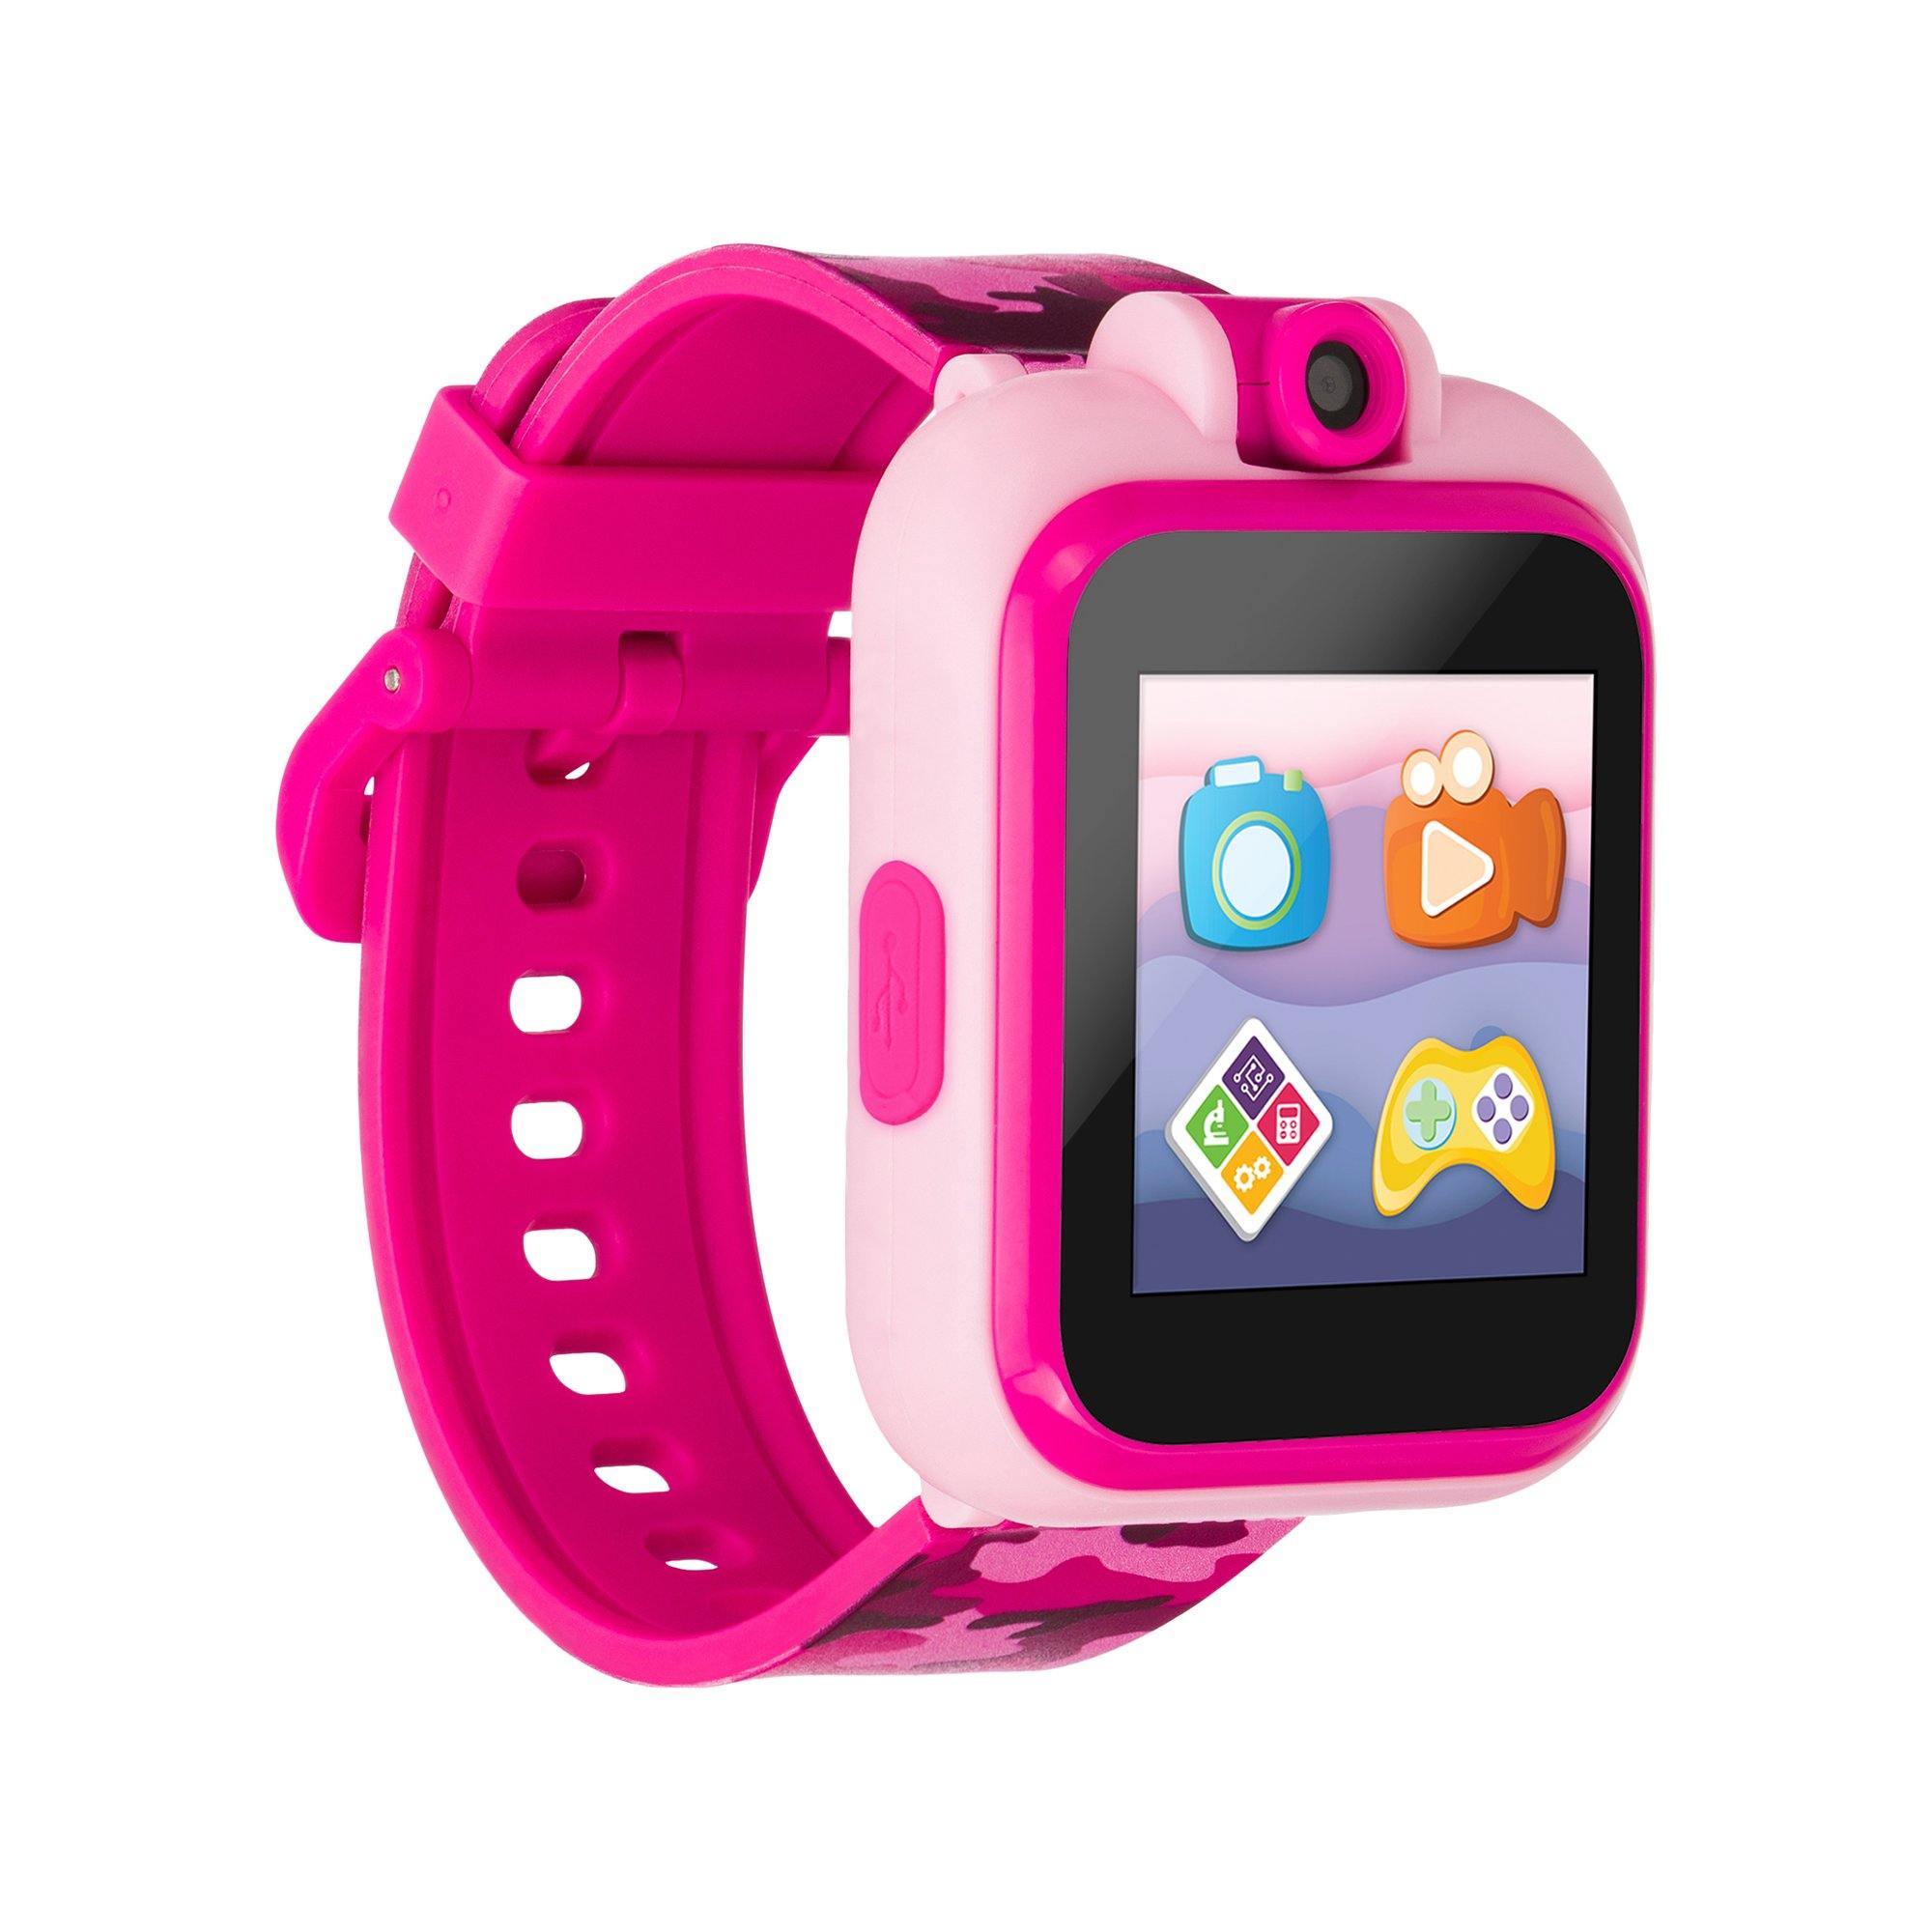 PlayZoom 2 Kids Smartwatch: Pink Camouflage affordable smart watch